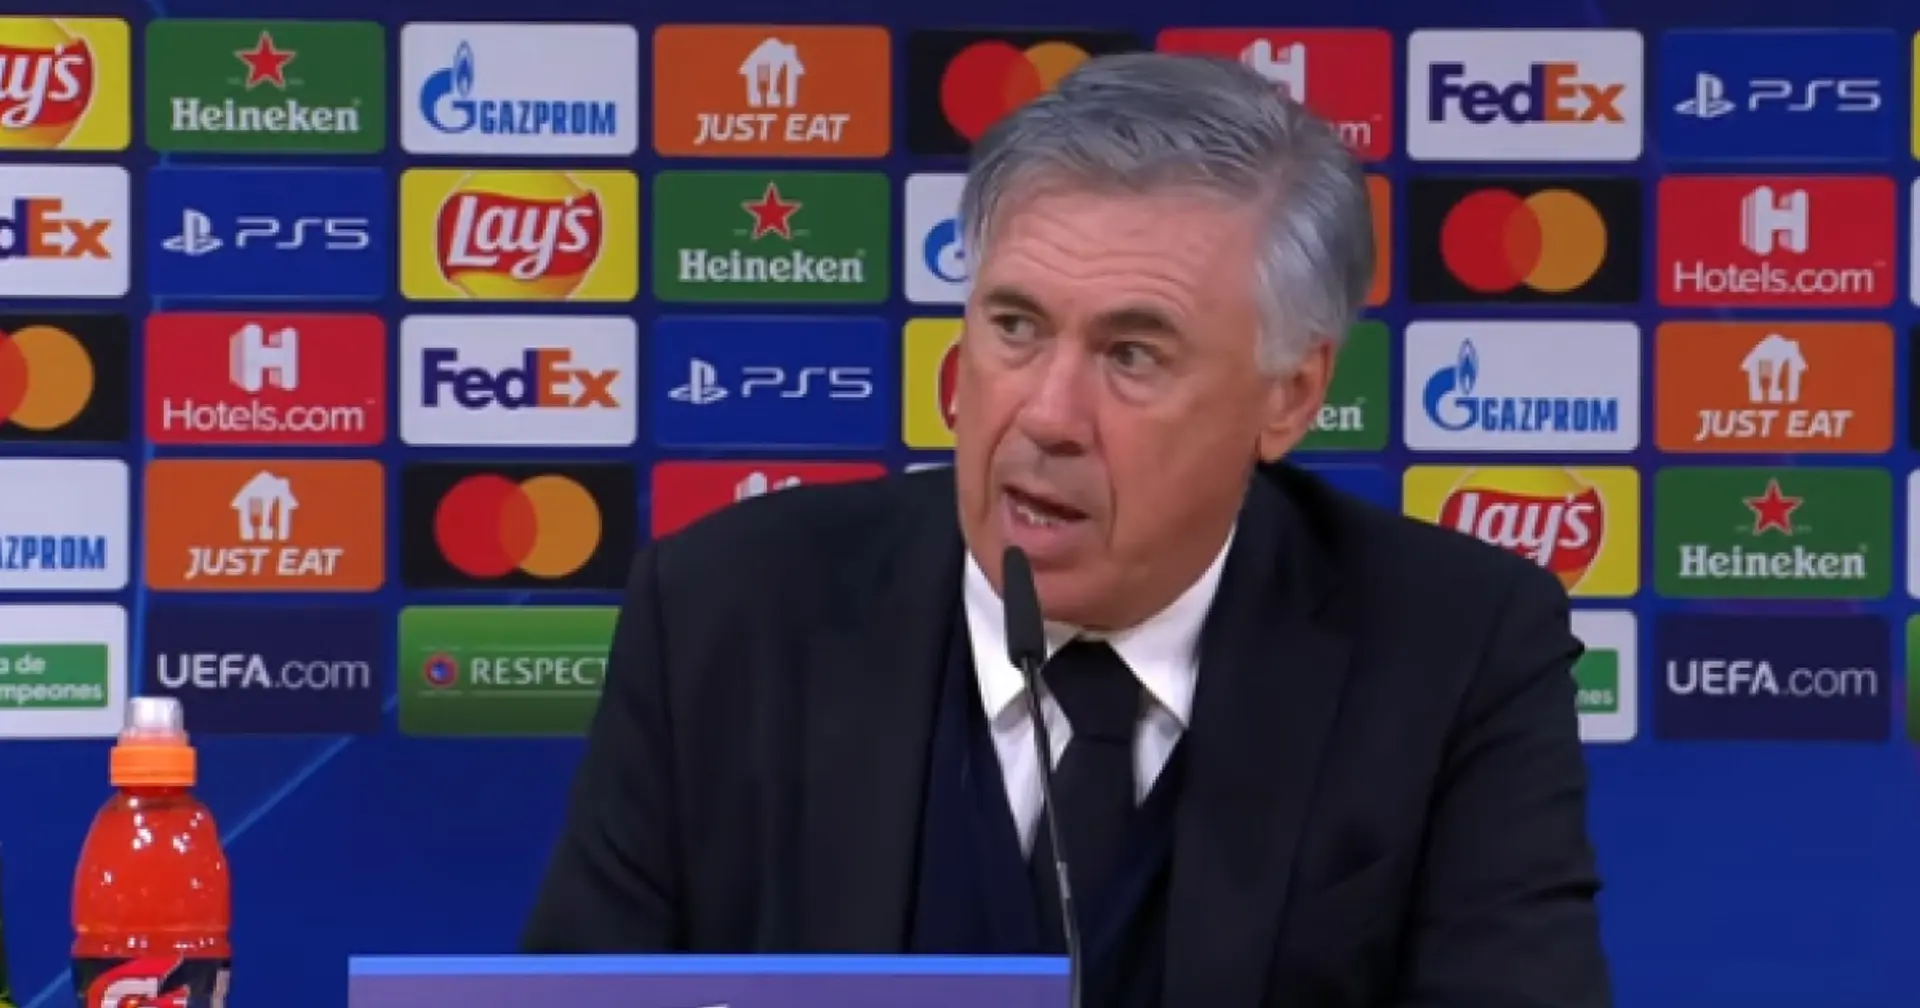 Ancelotti says he wants Madrid to qualify from CL group ASAP - it could happen in 7 days